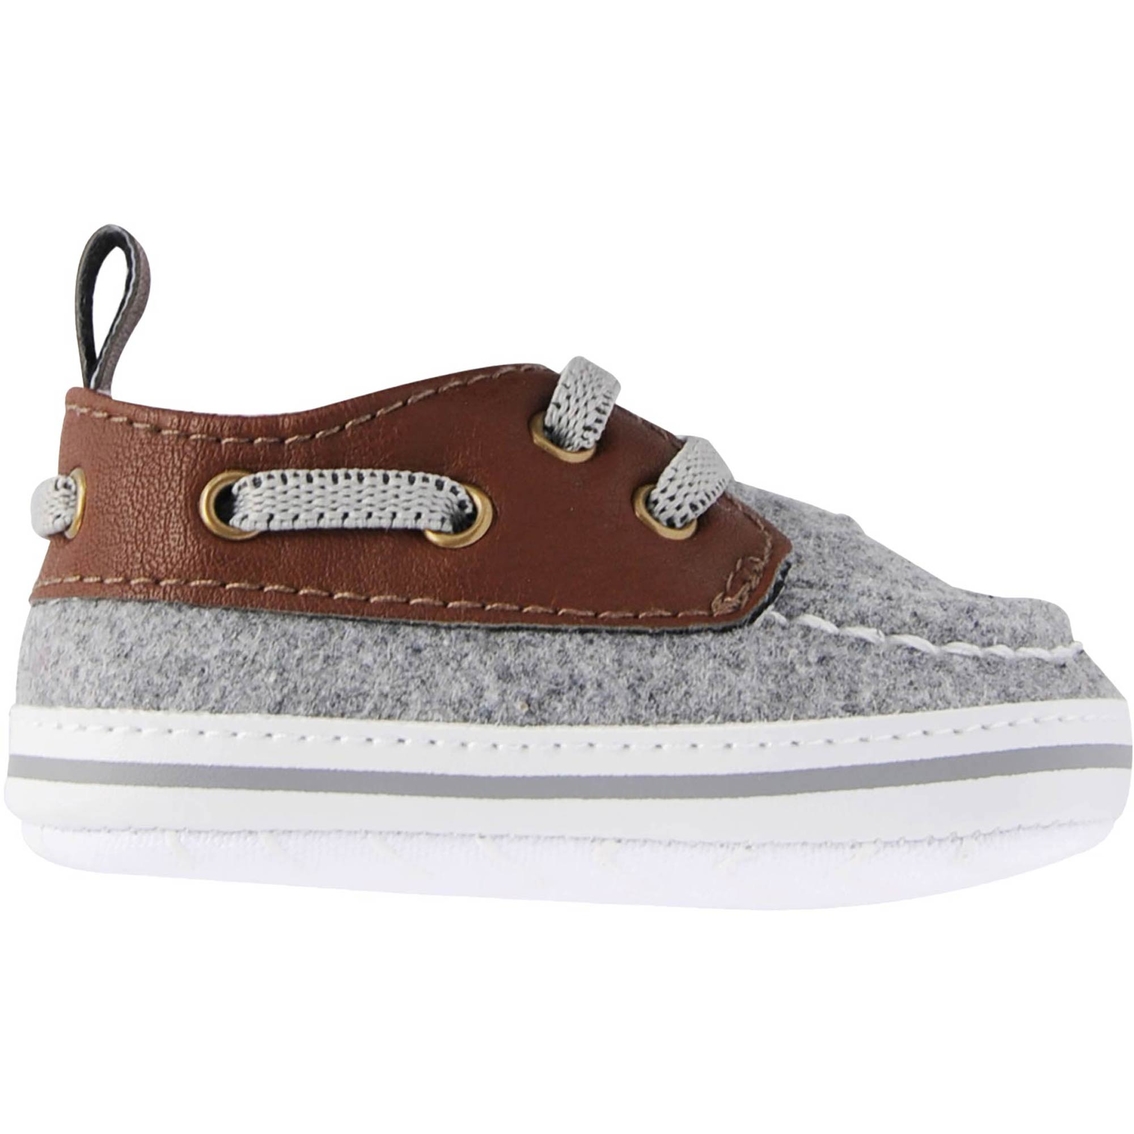 carters boys boat shoes